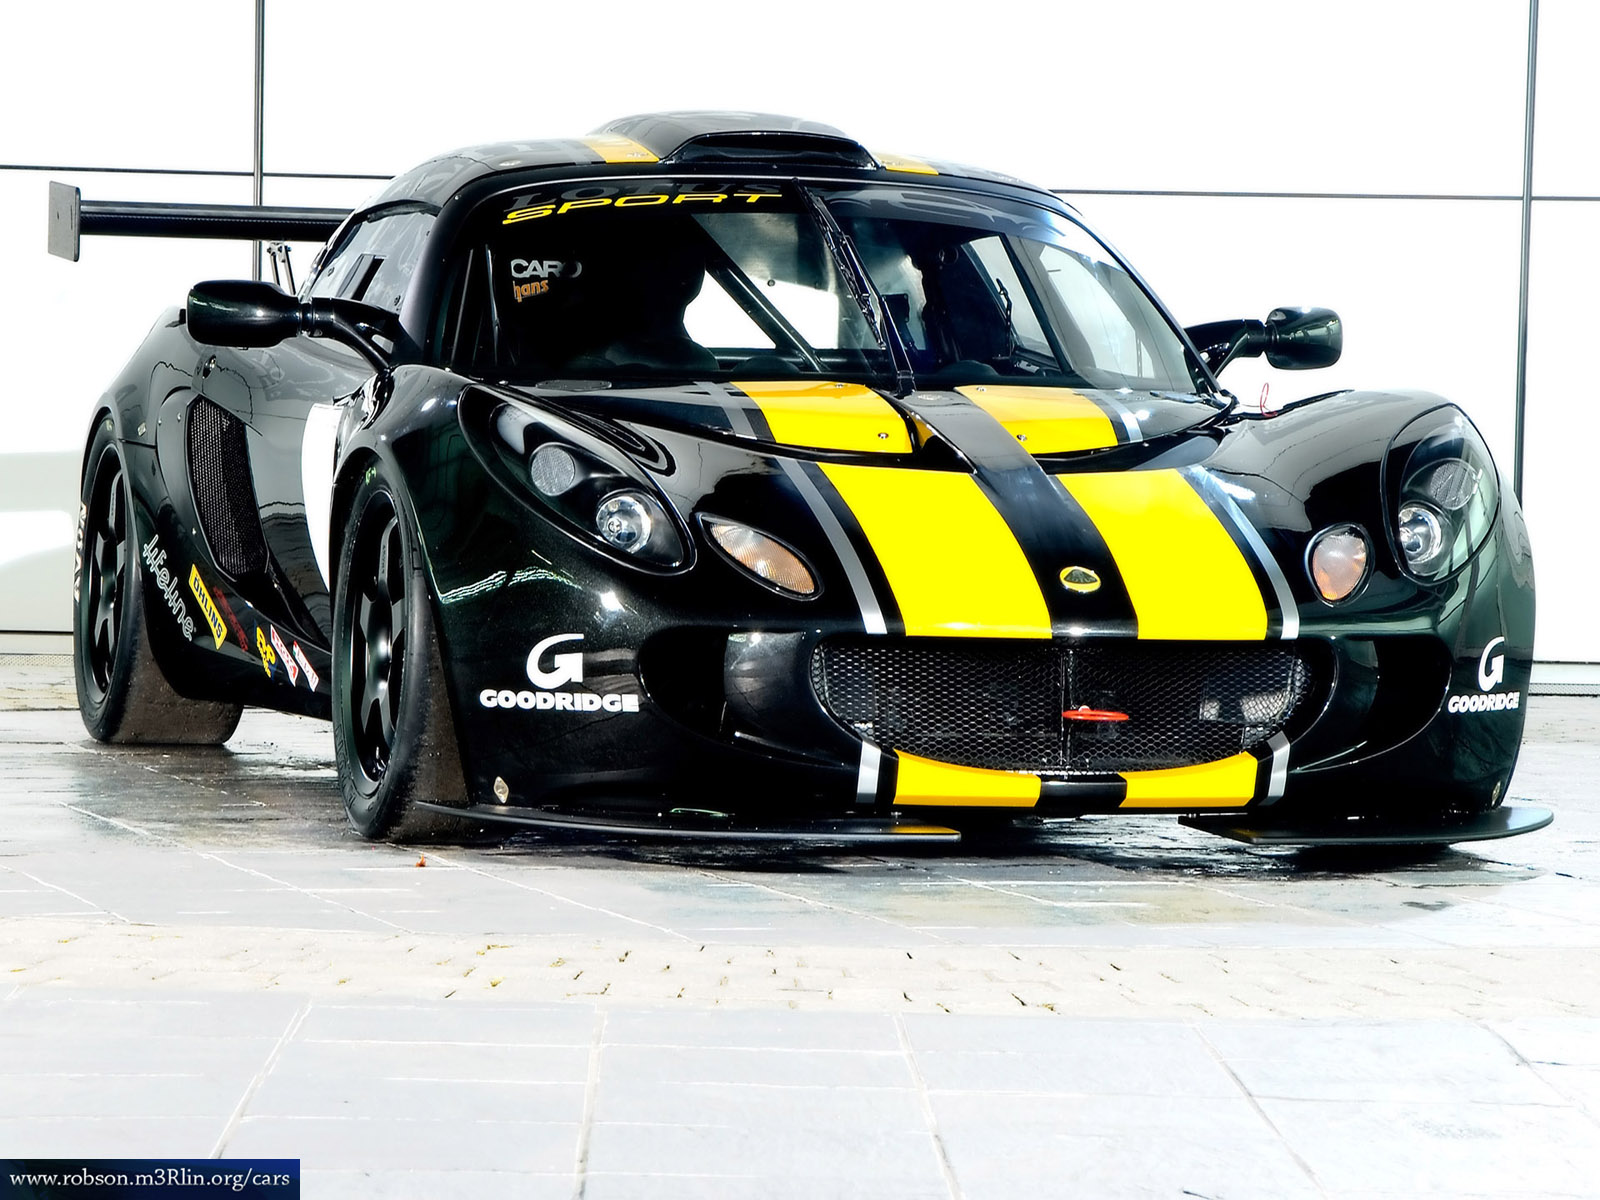 Lotus Exige 2005 | Cars - Pictures & Wallpapers, Automotive News ...